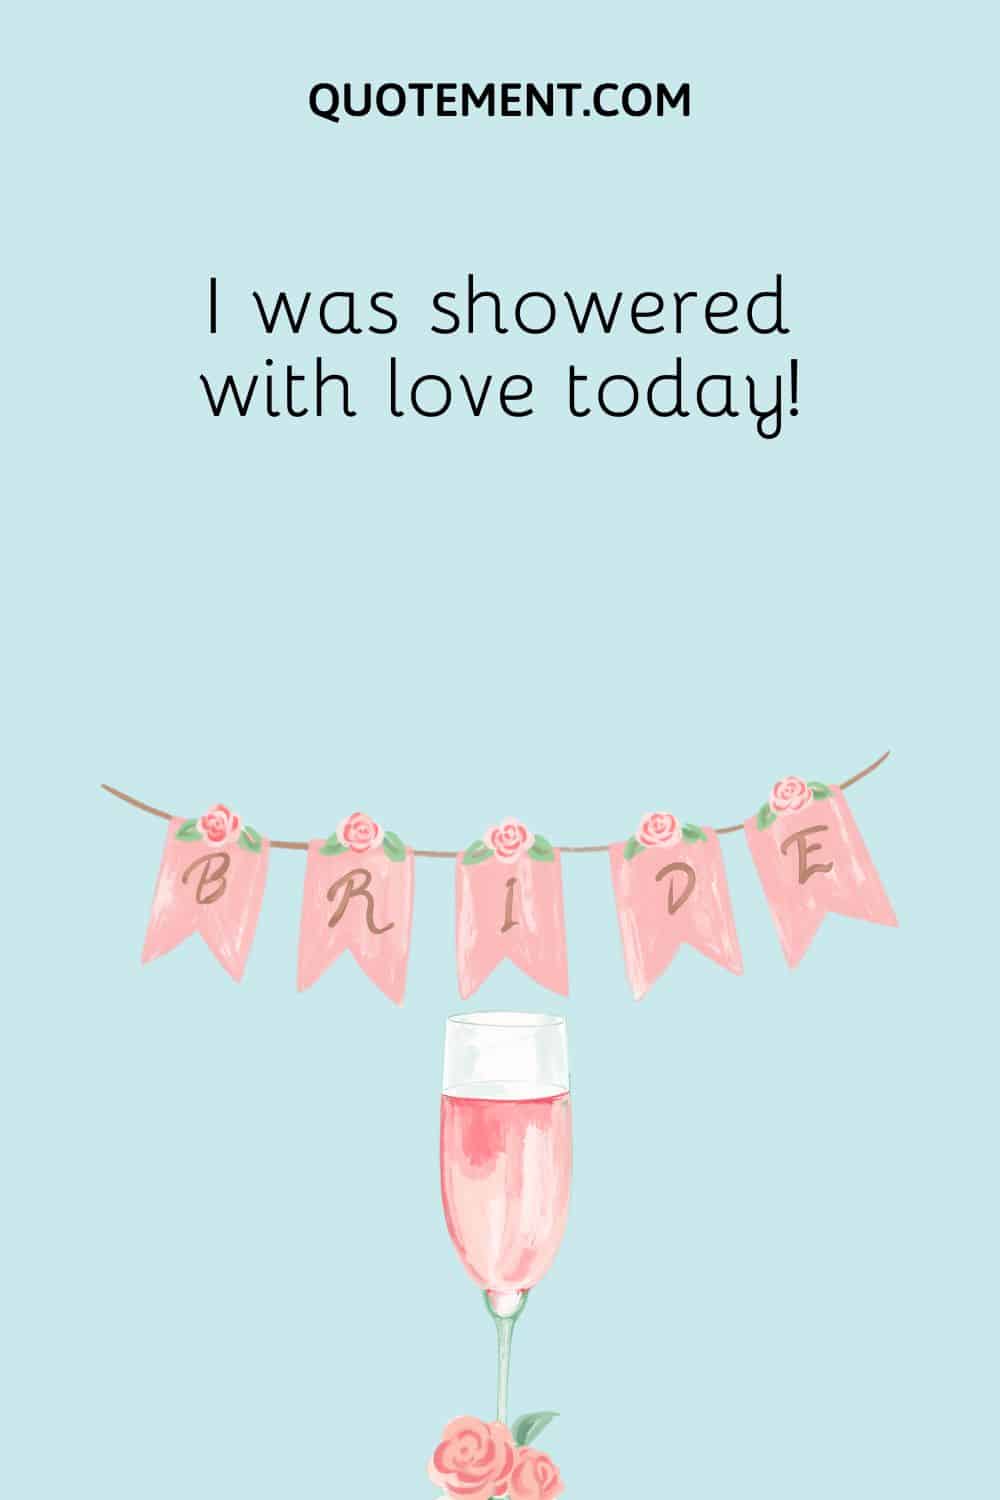 I was showered with love today!